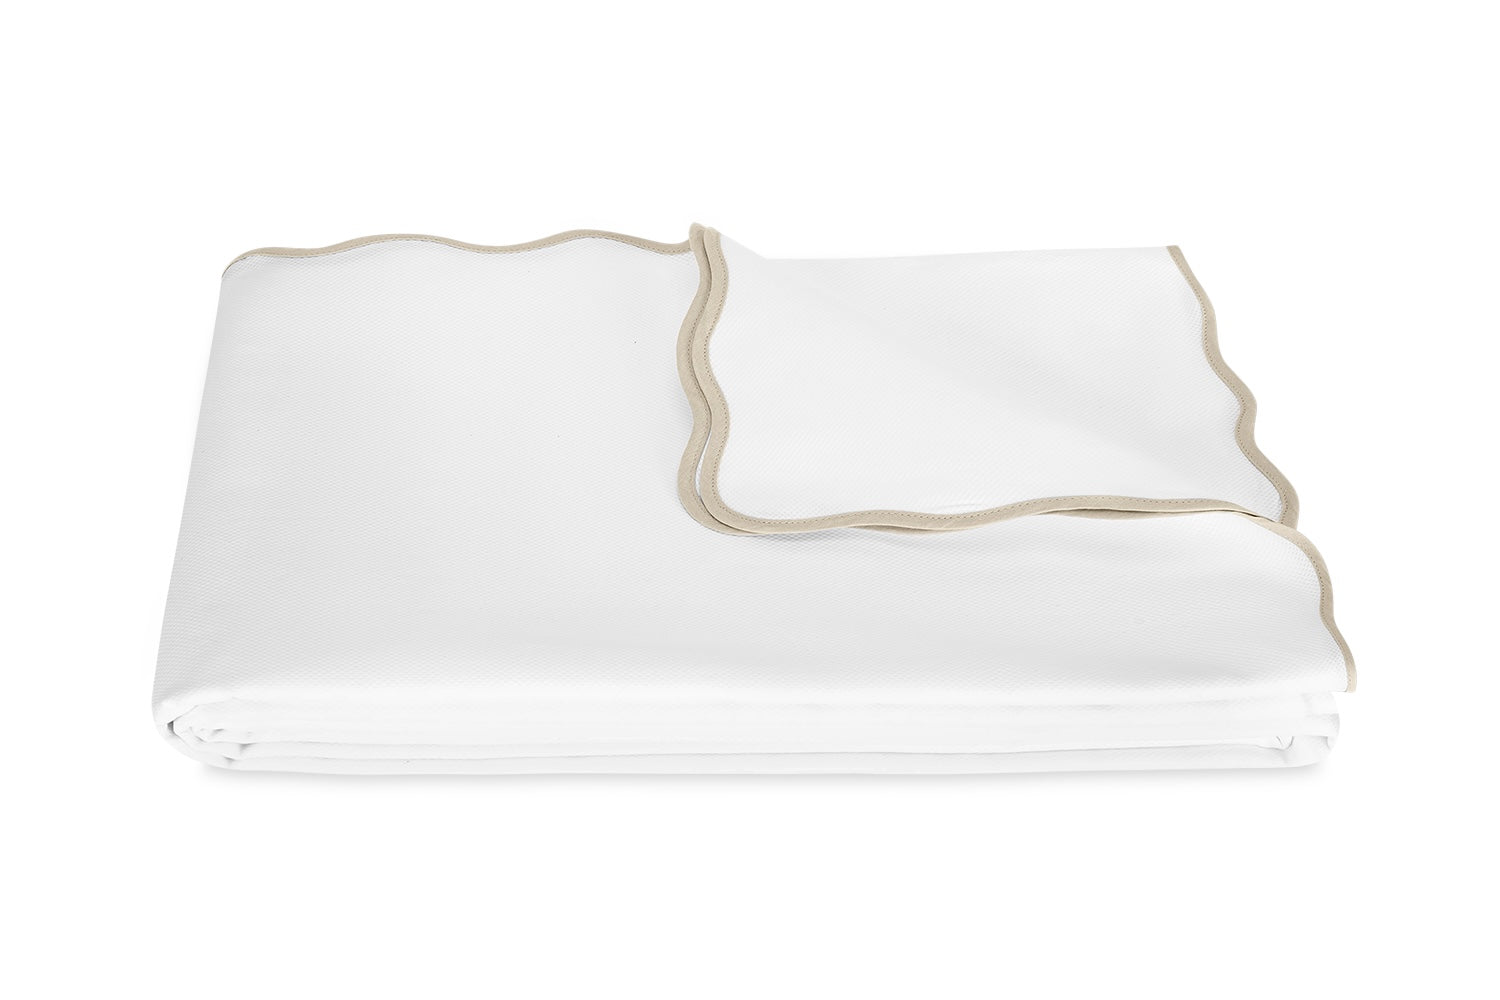 Coverlet - Matouk Camila Pique Dune Blanket Cover at Fig Linens and Home